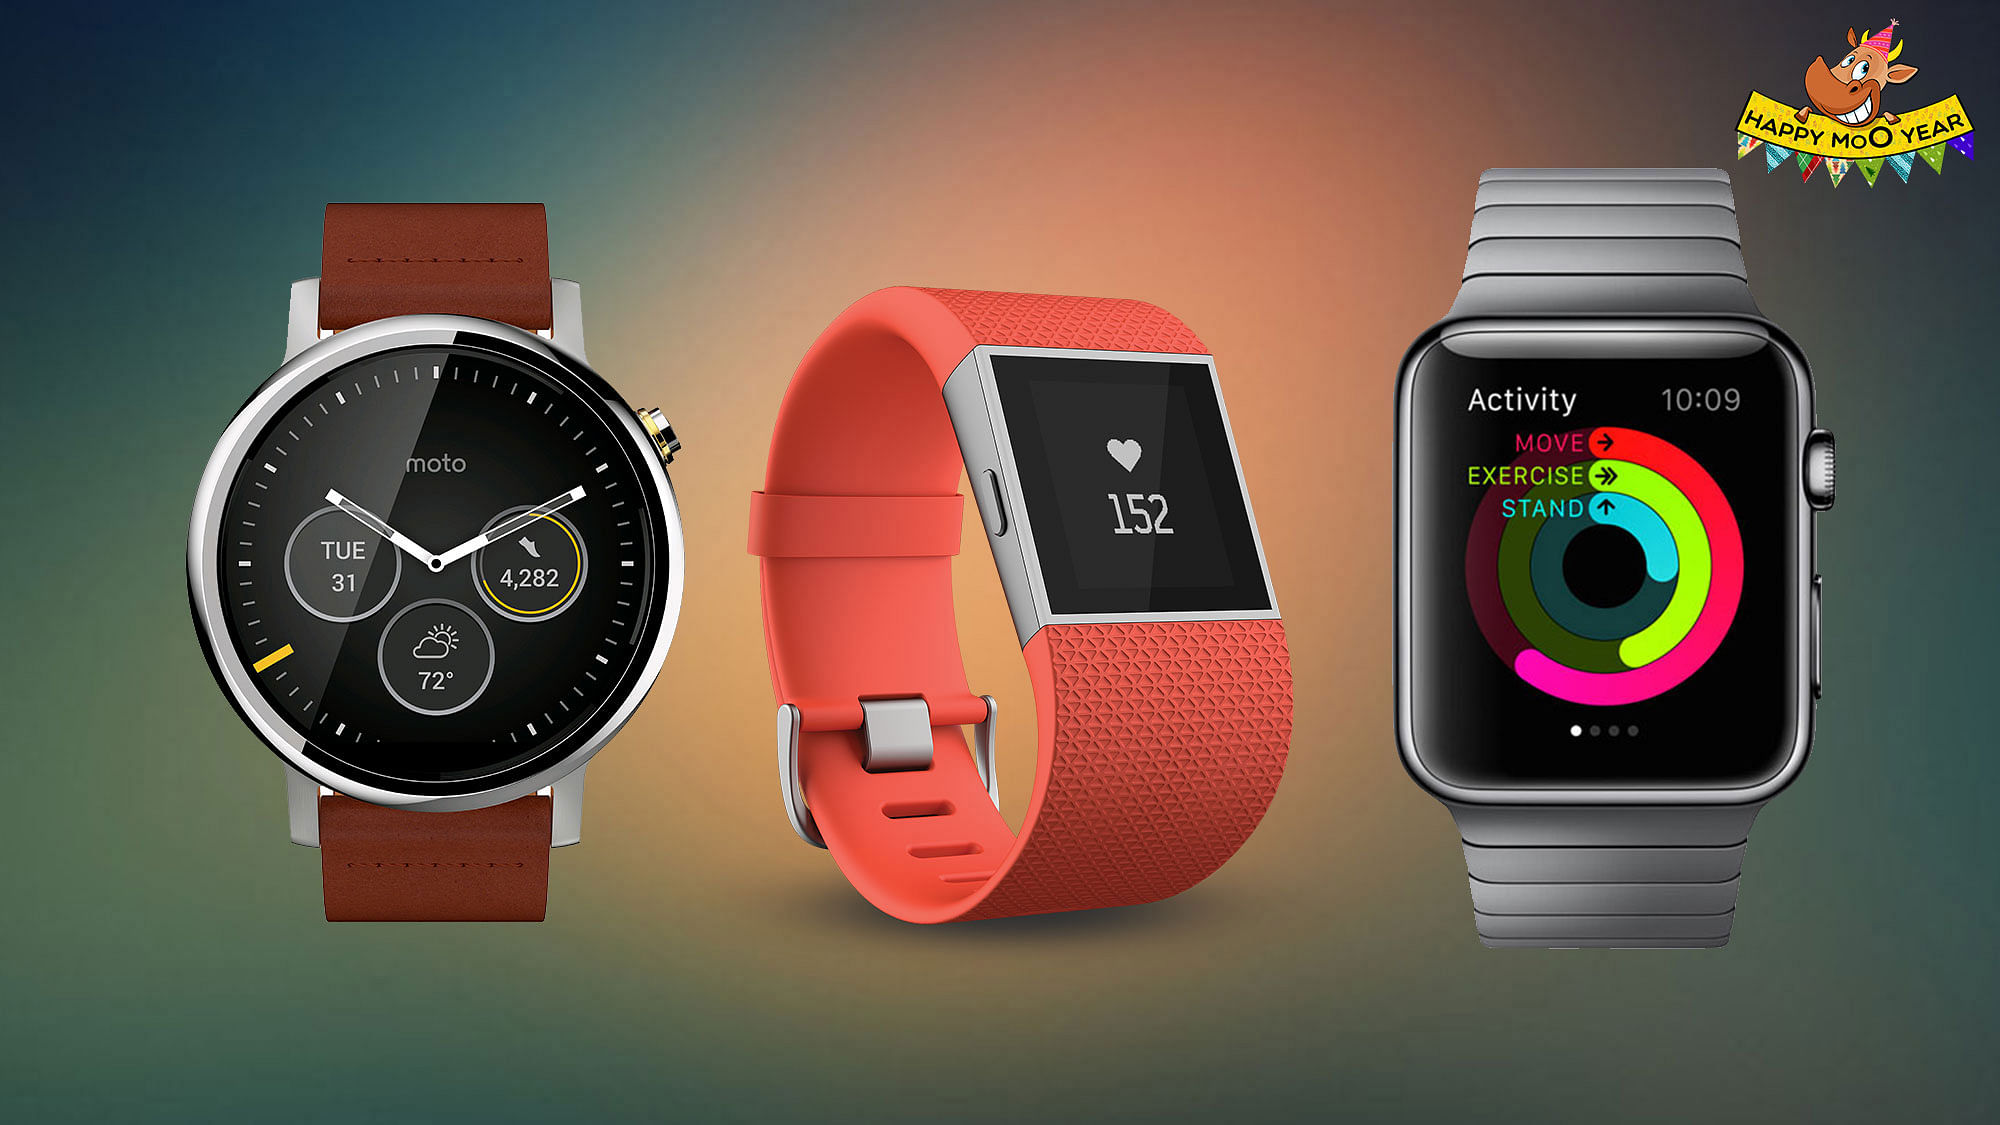 Top 5 Wearables of 2015: Apple Watch, Xiaomi Mi Band & More